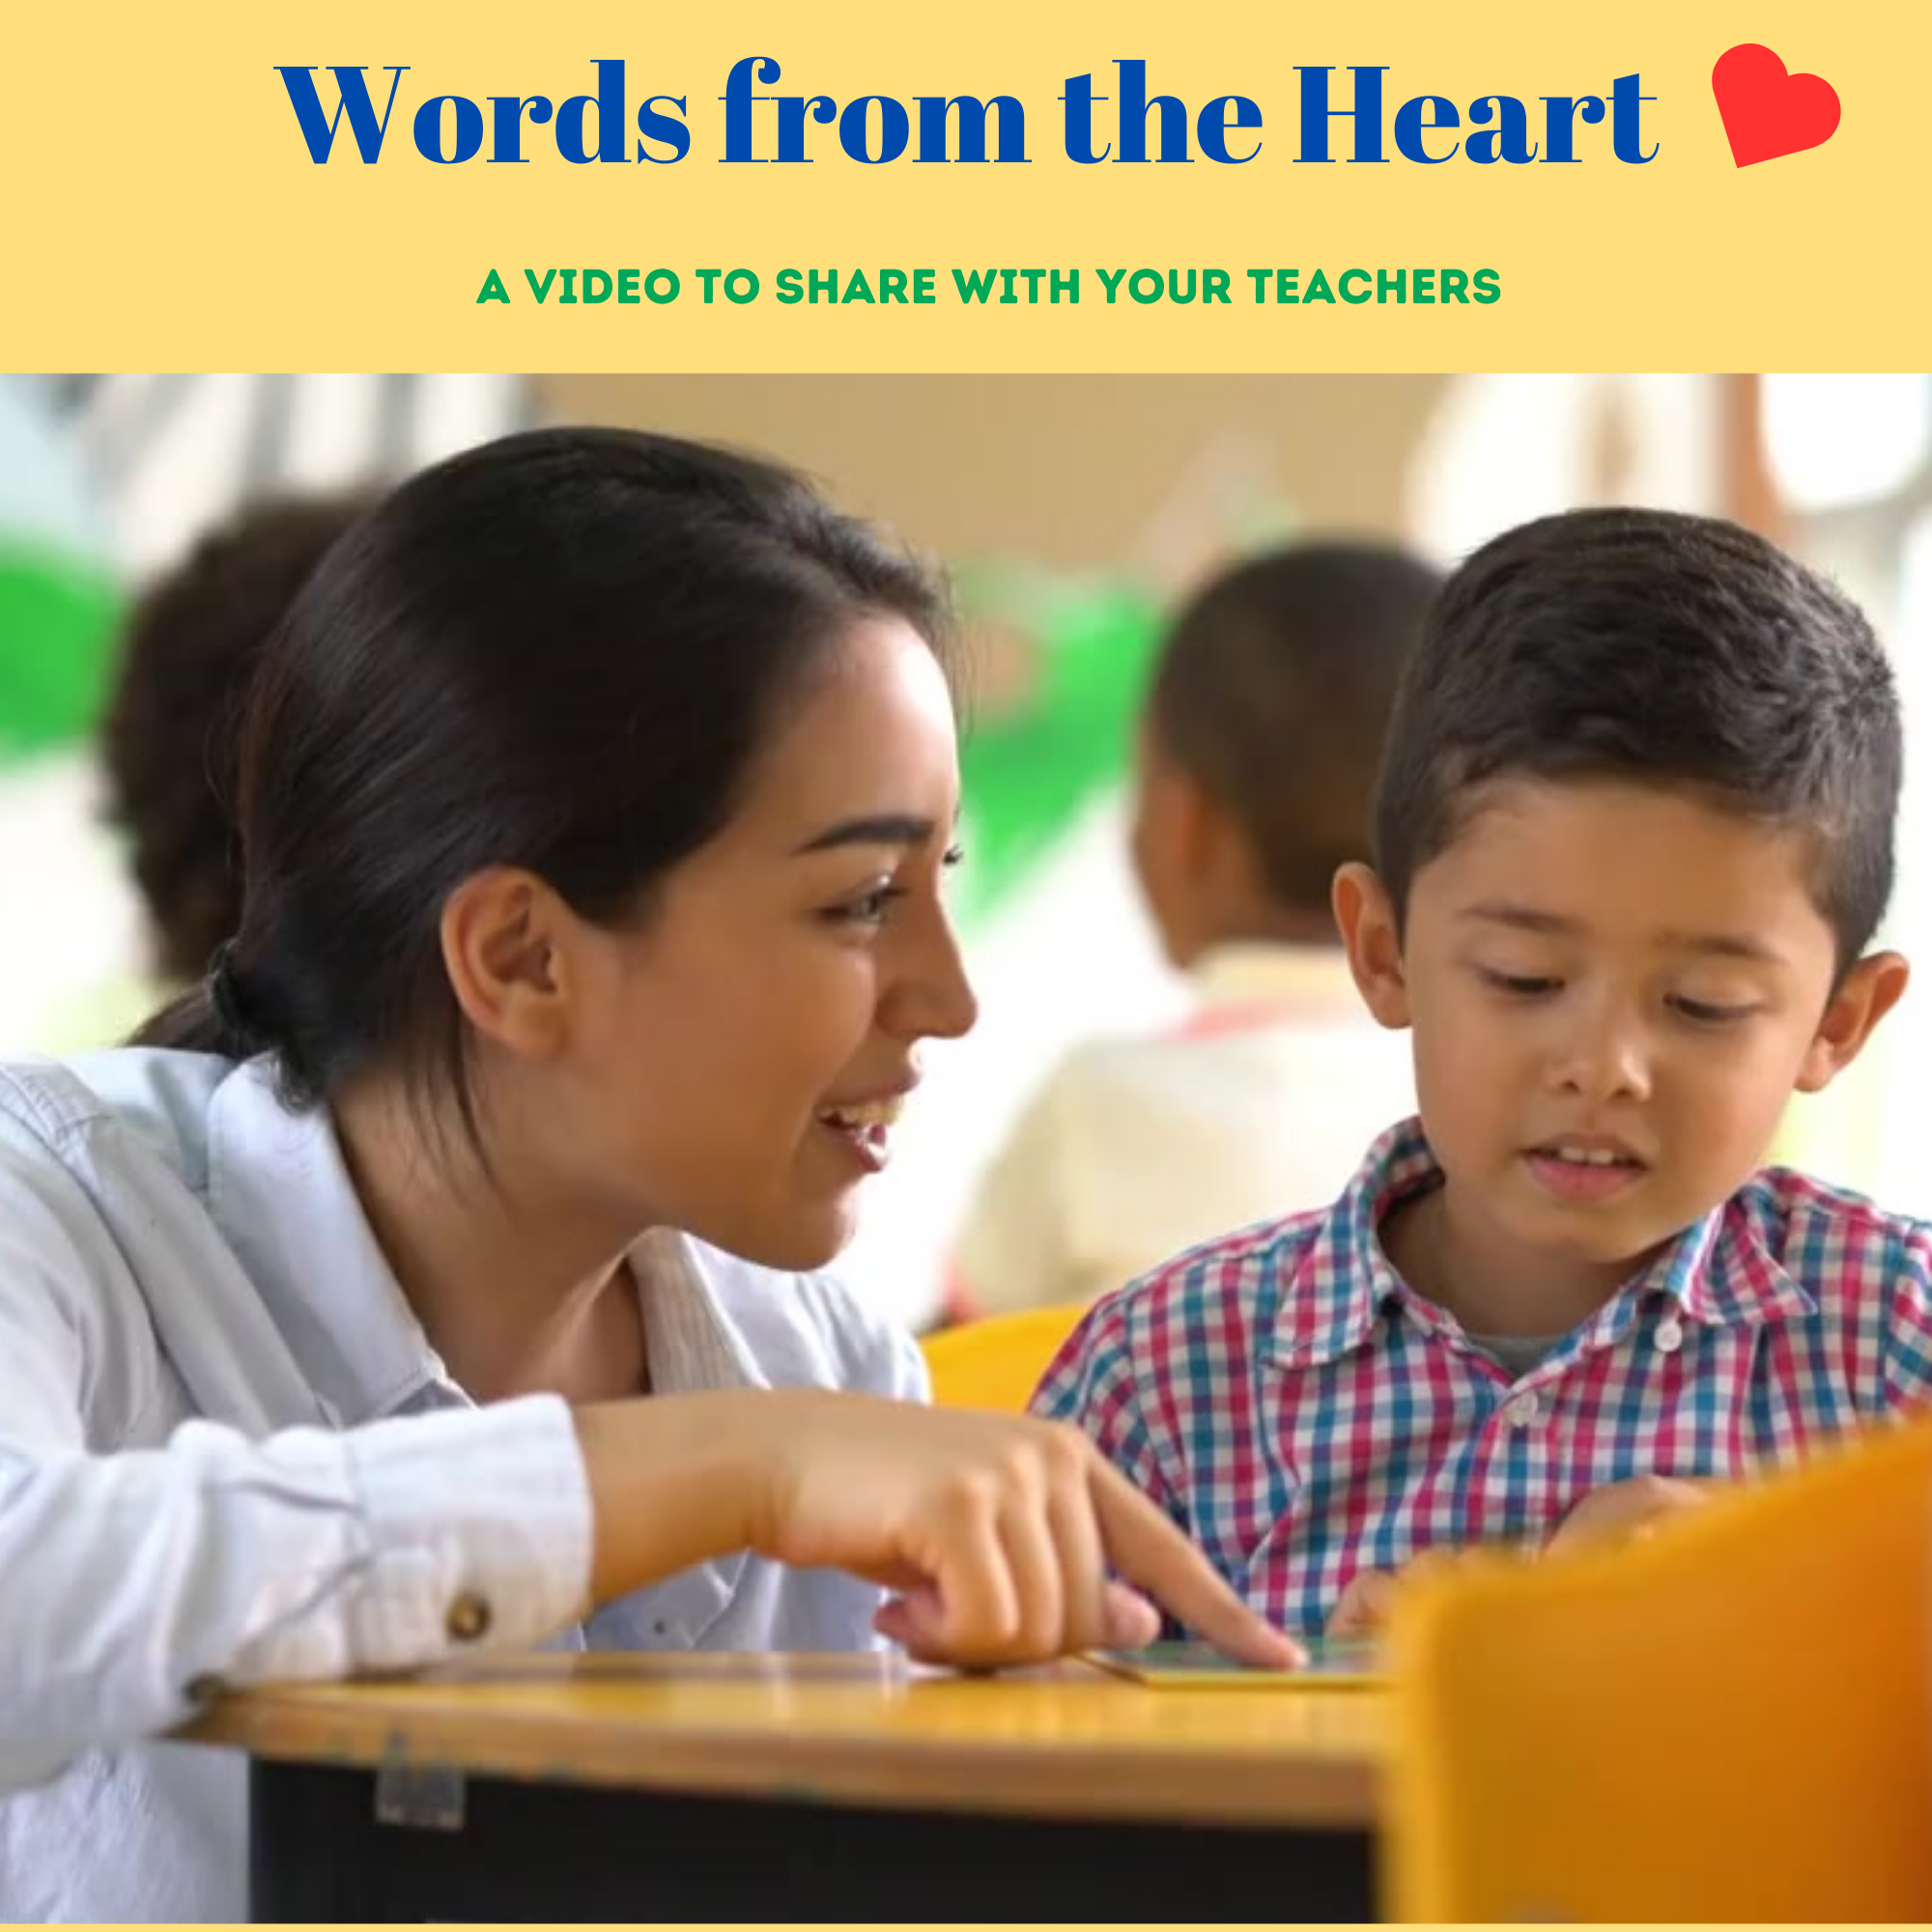 Words from the heart, inspiring appreciation quotes for teachers and educators everywhere!